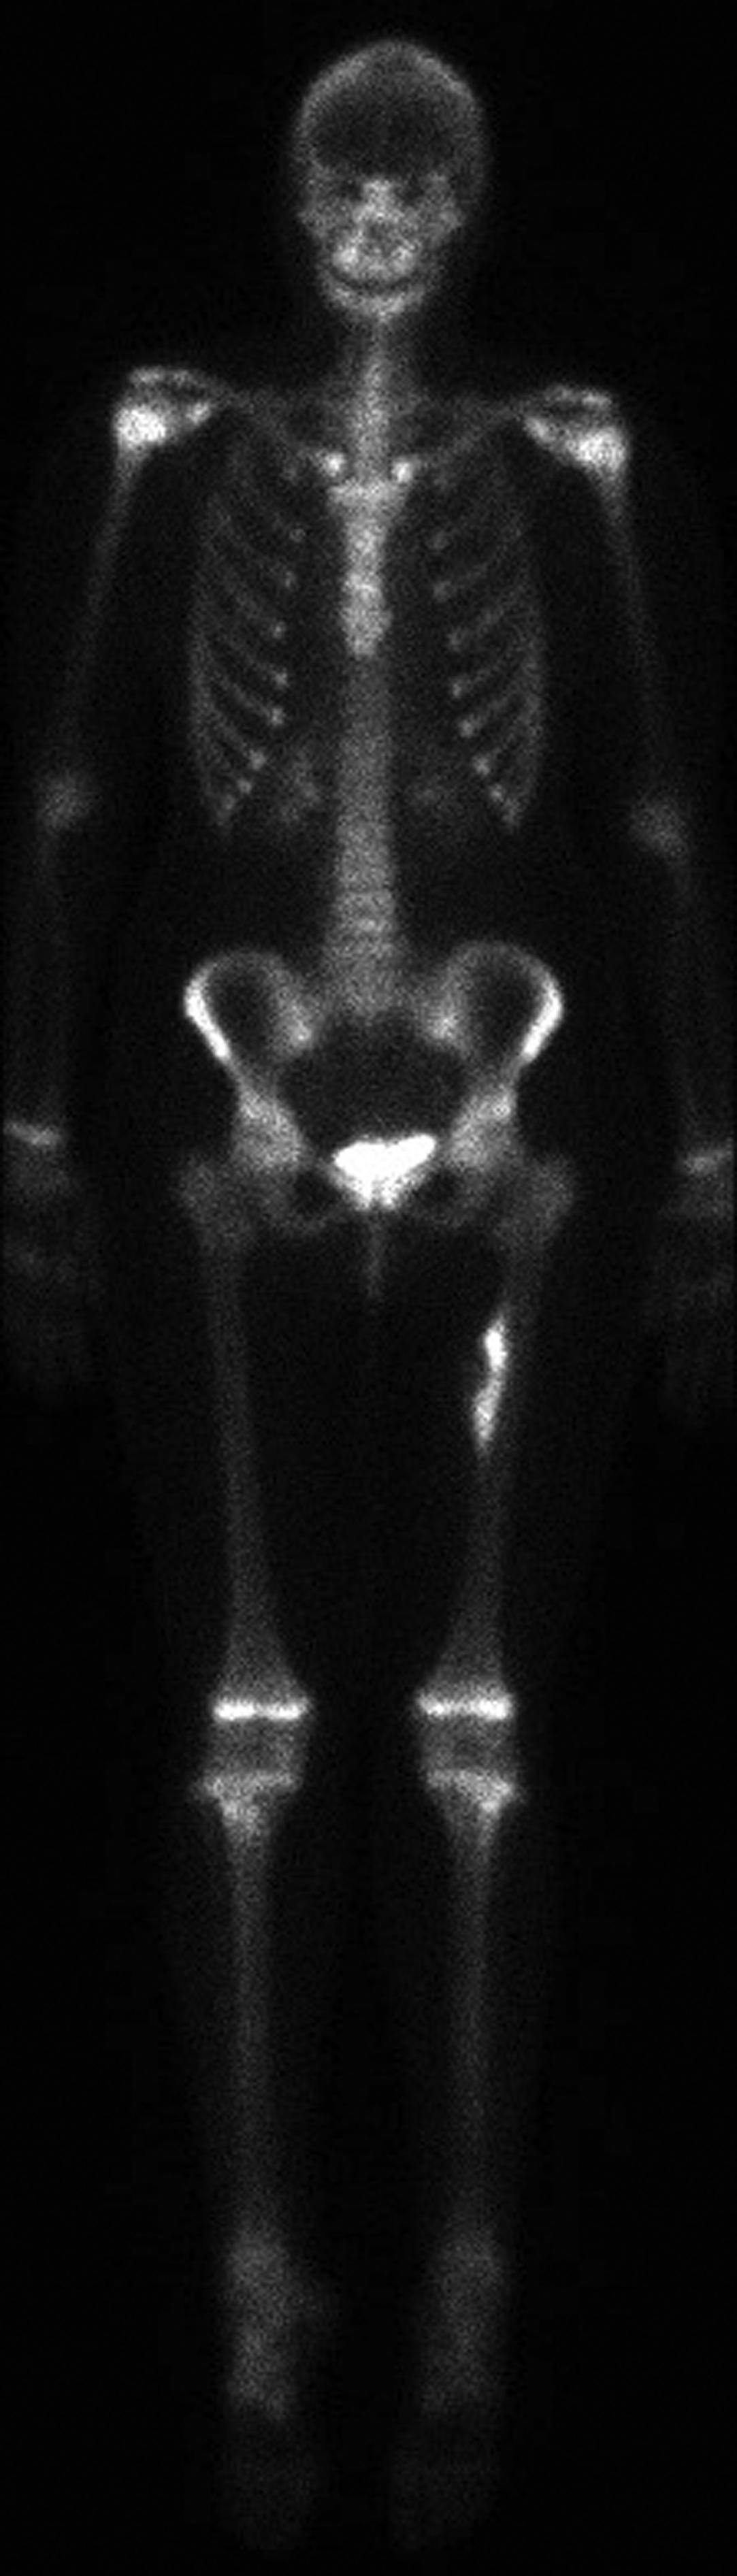 Figure 46.6, A frontal whole body image from a Tc-99m MDP bone scan with increased activity in the proximal left femur, which corresponded to a patient's primary osteosarcoma. Physiologic activity is present in the growth plates of this skeletally immature patient and also in the kidneys and bladder. No abnormal foci of increased activity was noted on this bone scan to suggest metastatic disease.